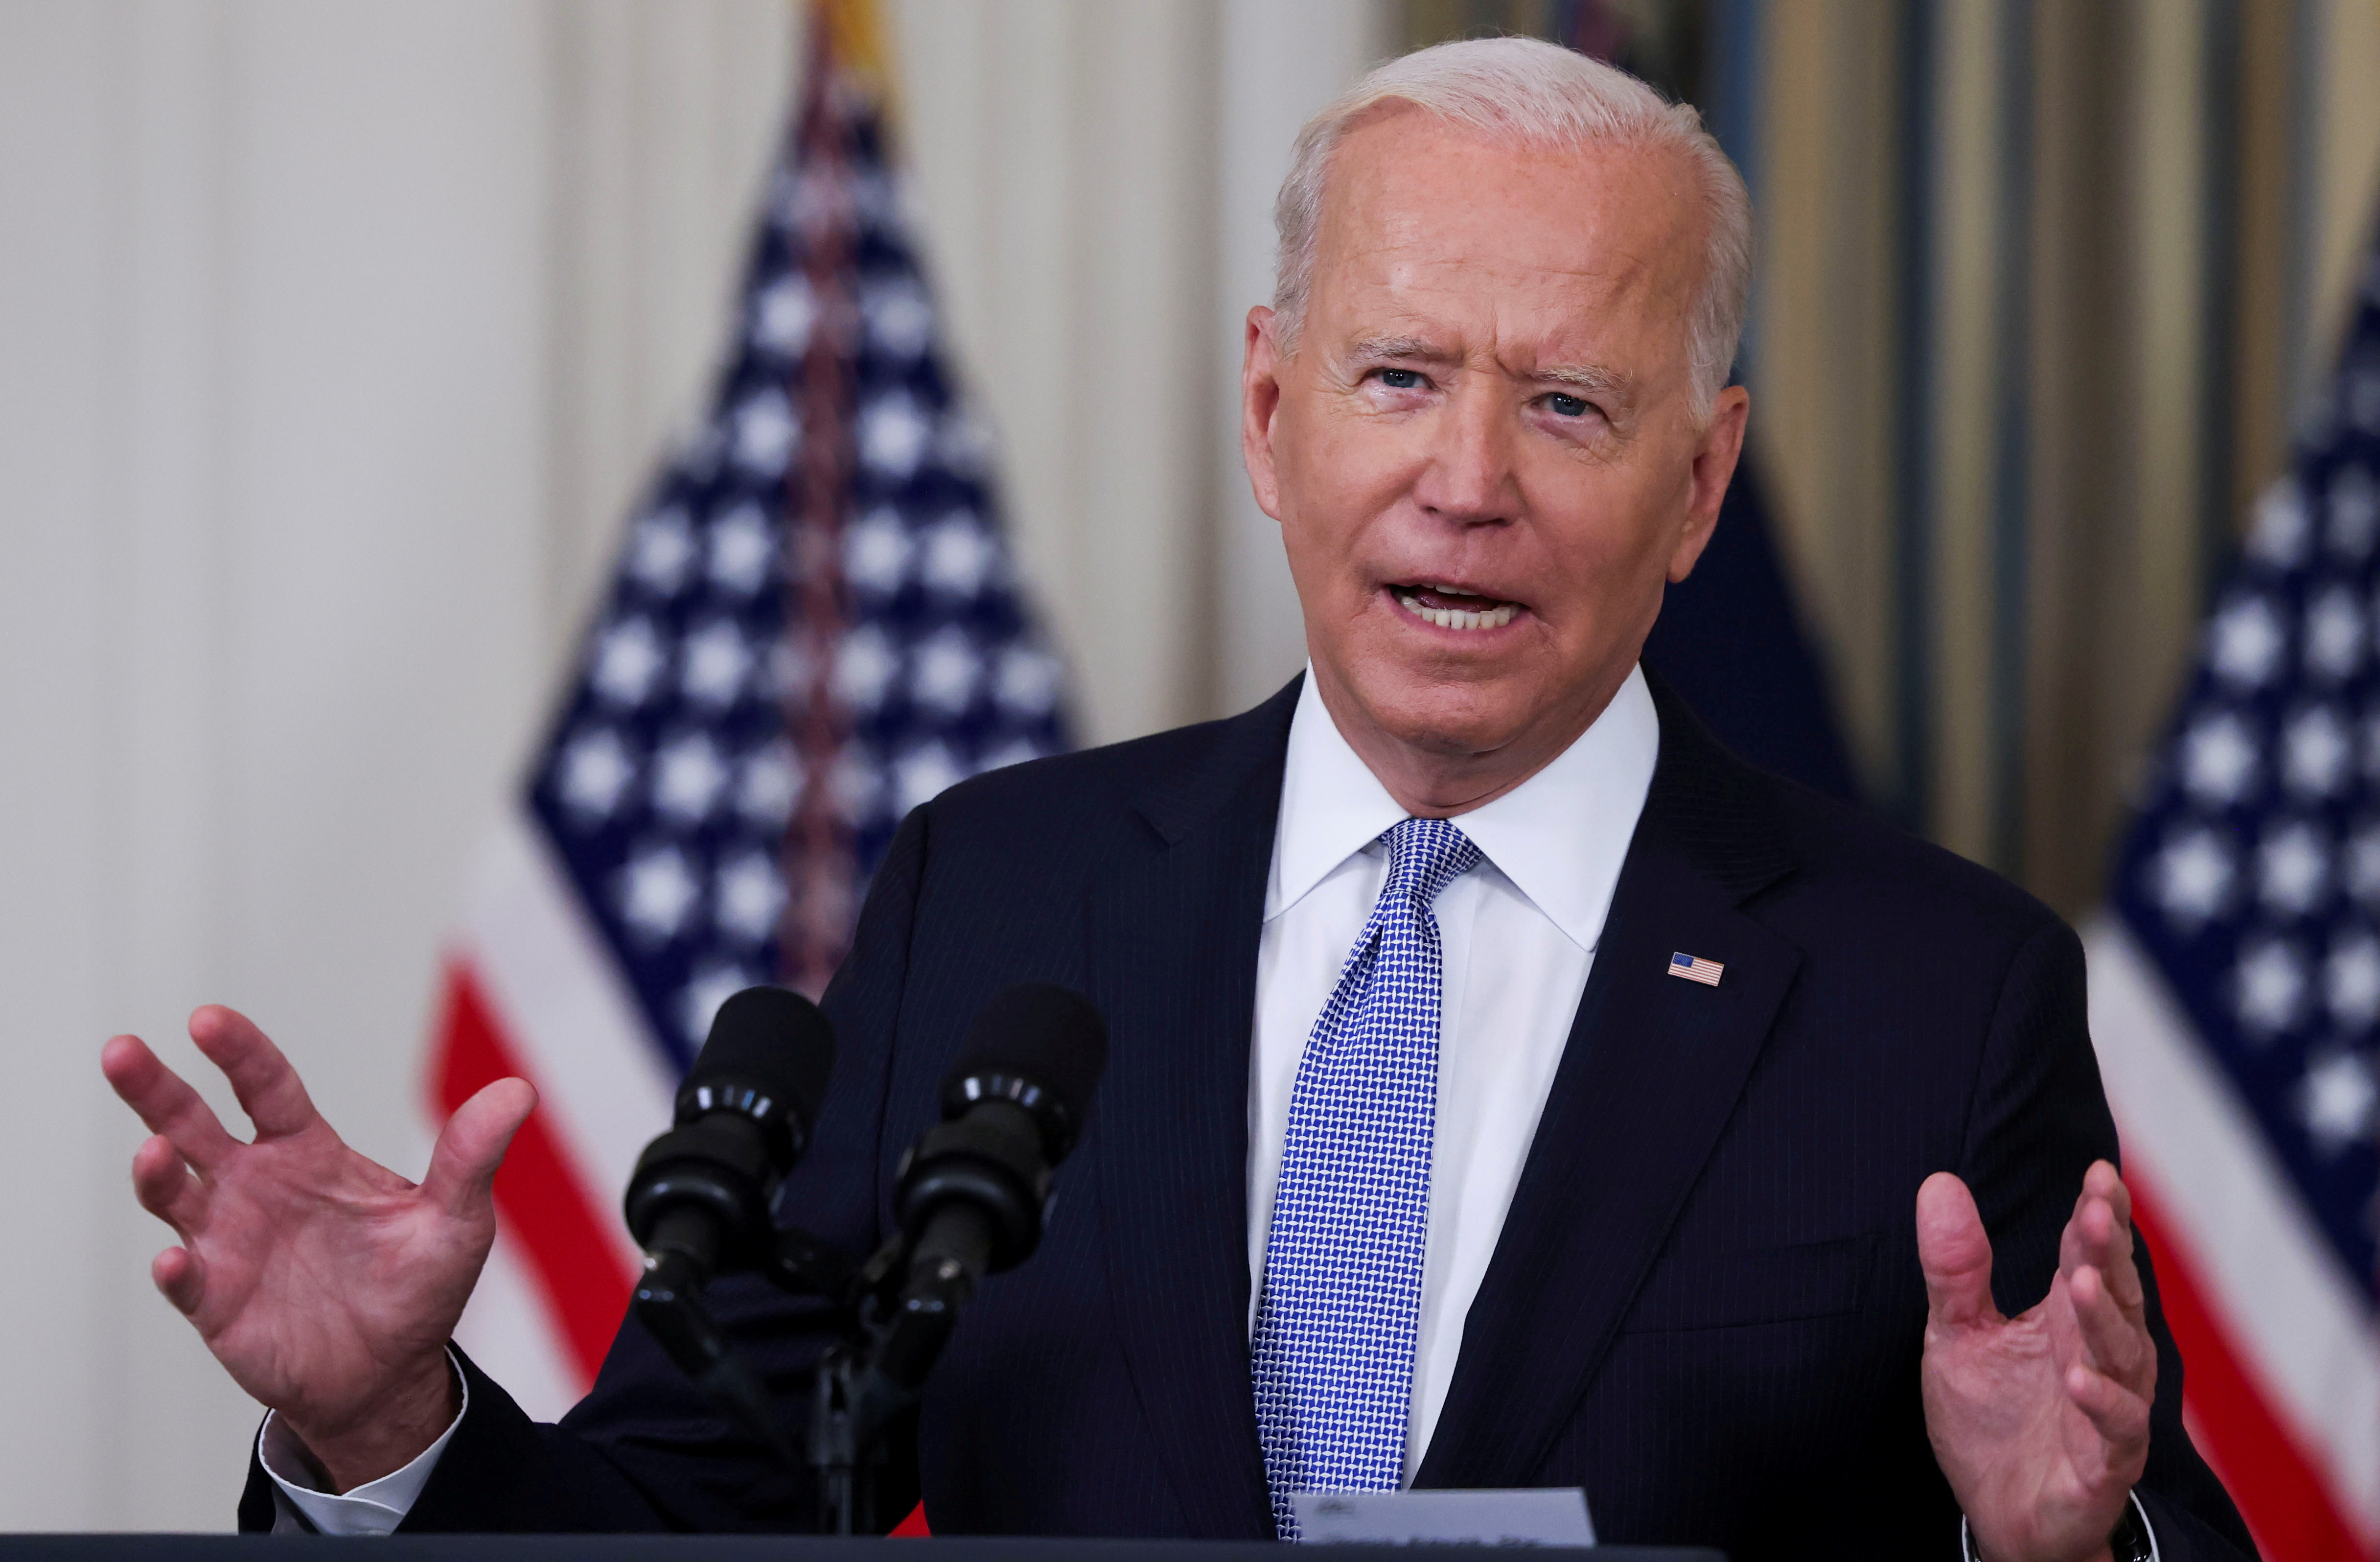 U.S. President Joe Biden responds to a question from a reporter after speaking about coronavirus disease (COVID-19) vaccines and booster shots in the State Dining Room at the White House in Washington, U.S., September 24, 2021. REUTERS/Evelyn Hockstein